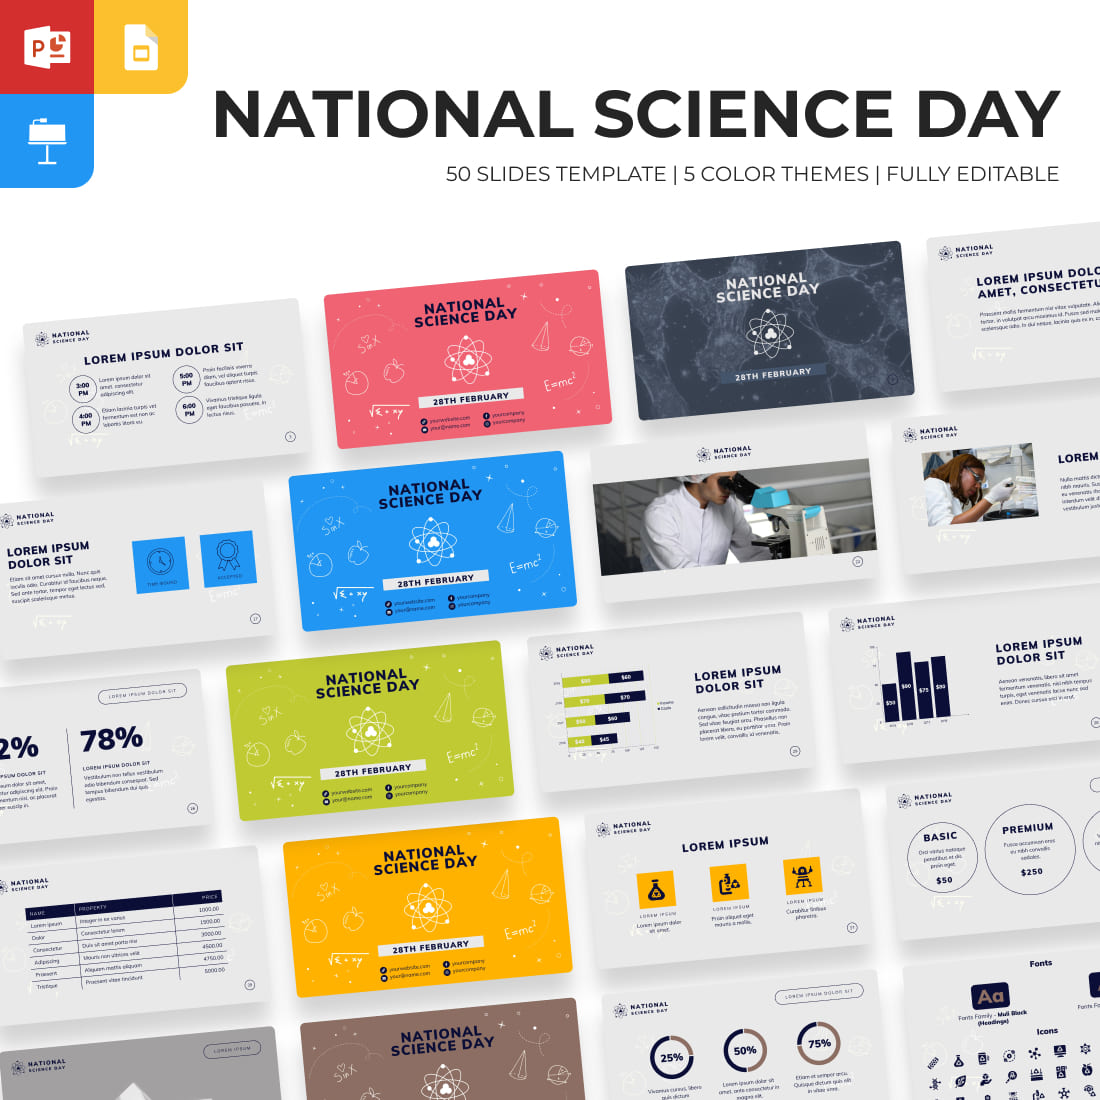 National Science Day Presentation Template.